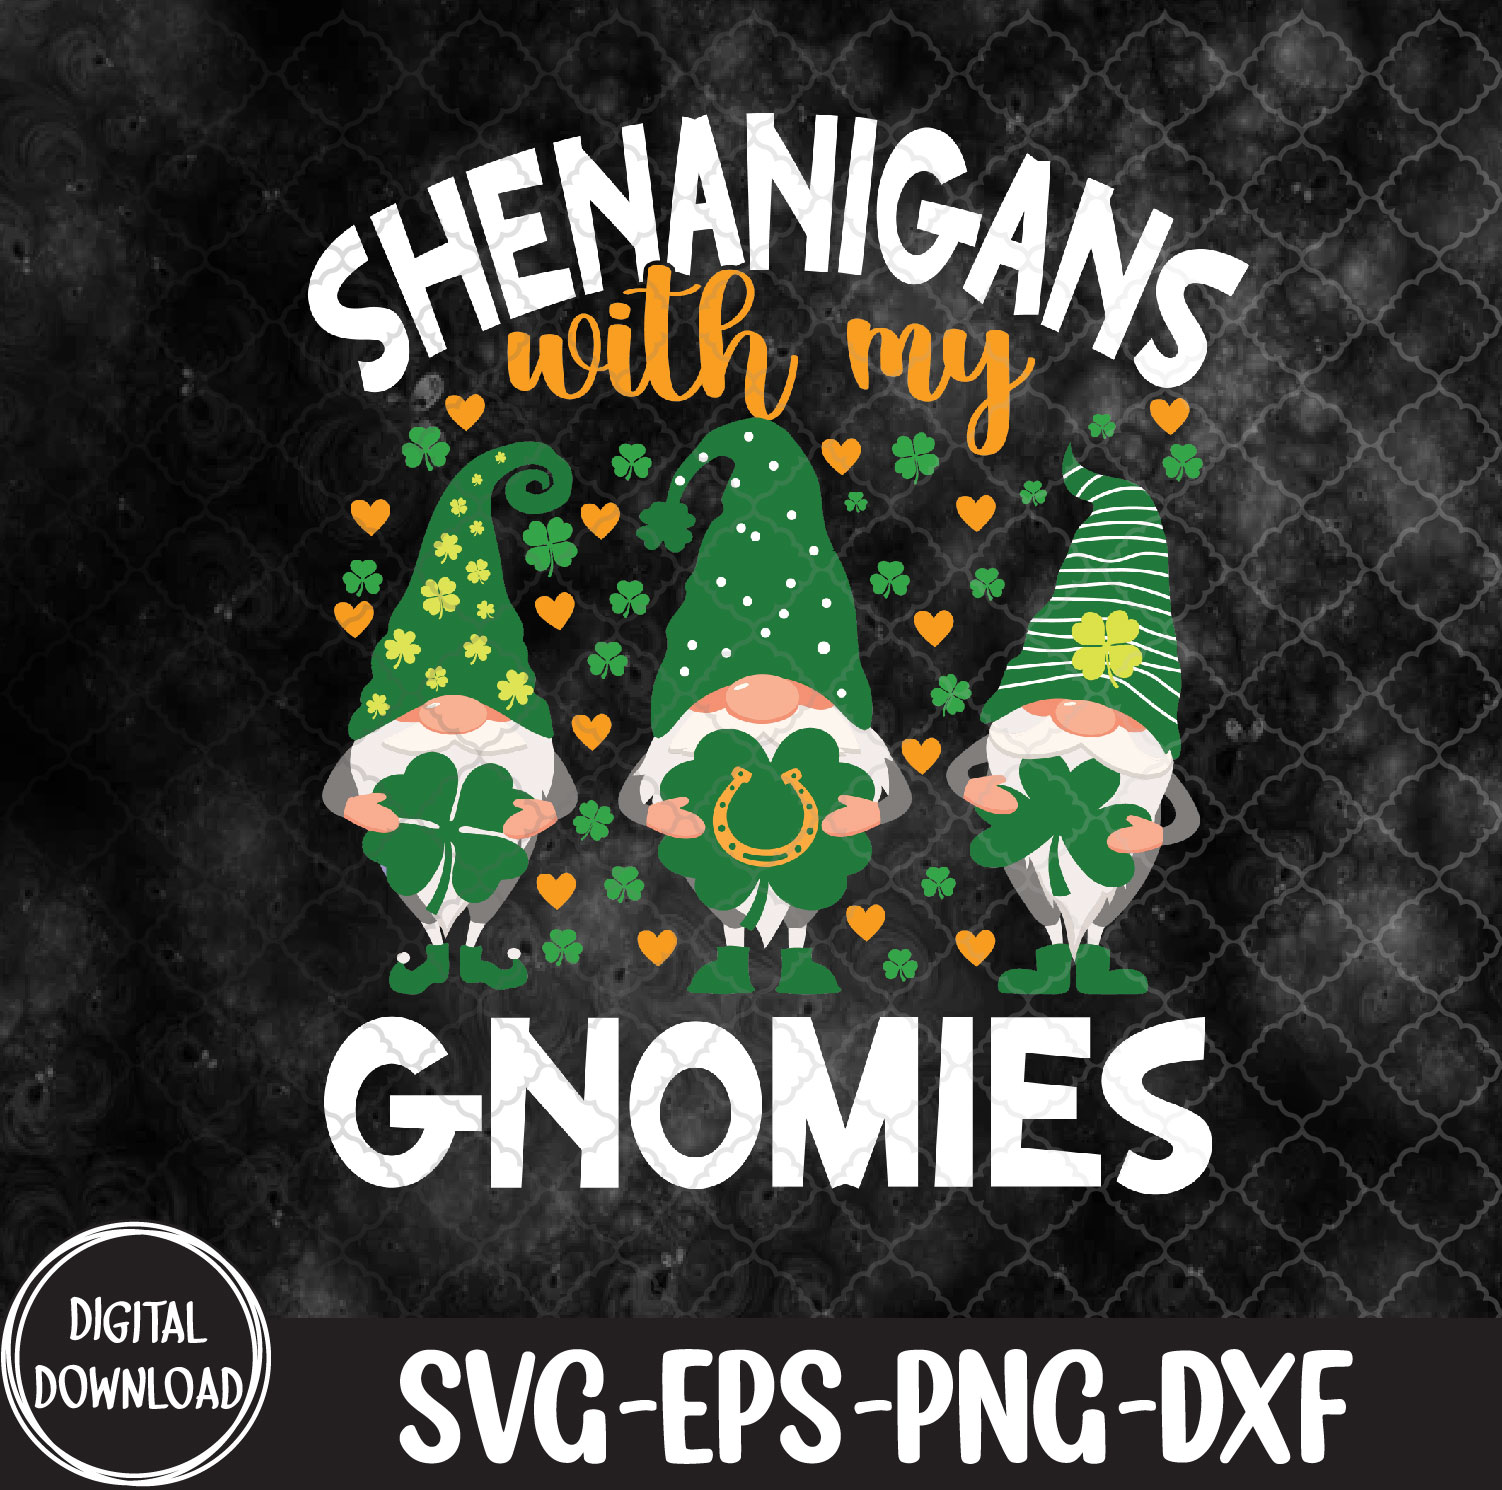 WTMNEW9file 07 09 Shenanigans With My Gnomies St Patricks Day Irish Gnomes, St Patricks Day svg, Svg, Eps, Png, Dxf